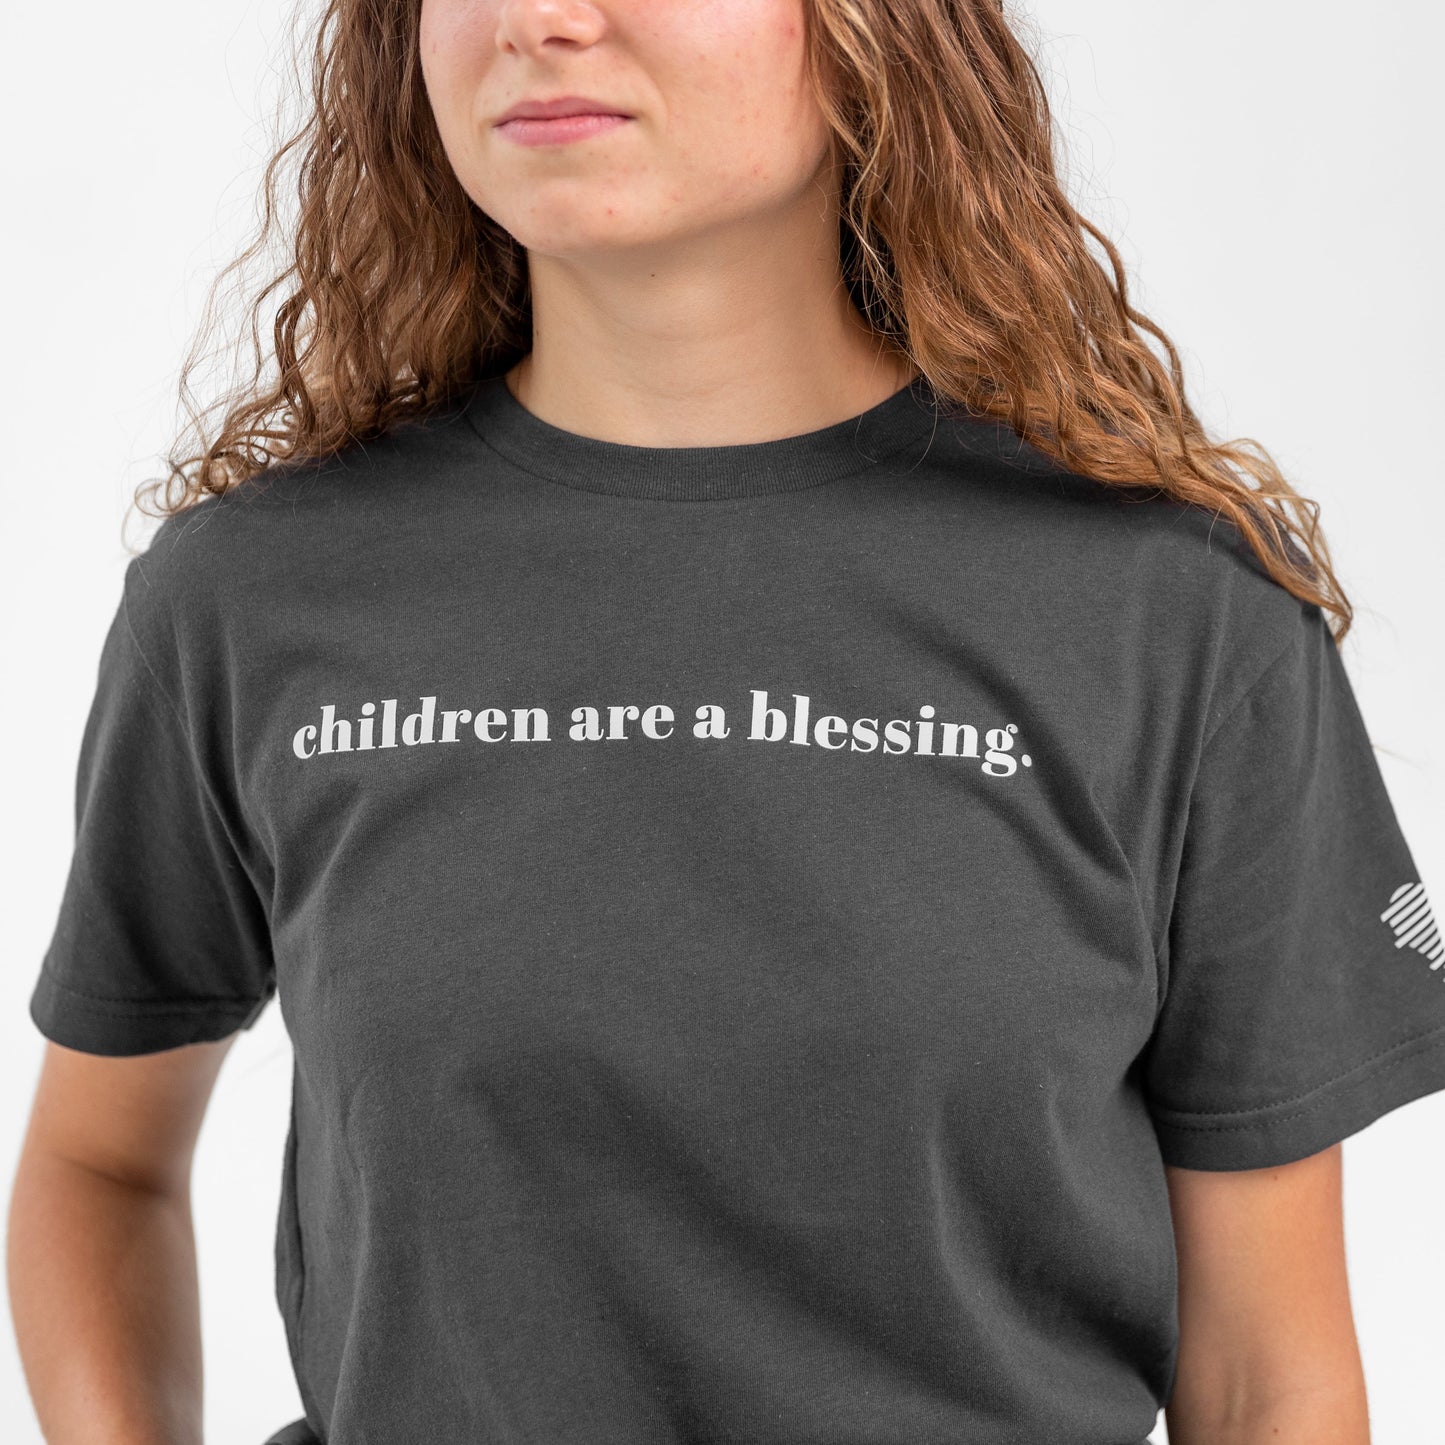 Children Are a Blessing T-Shirt